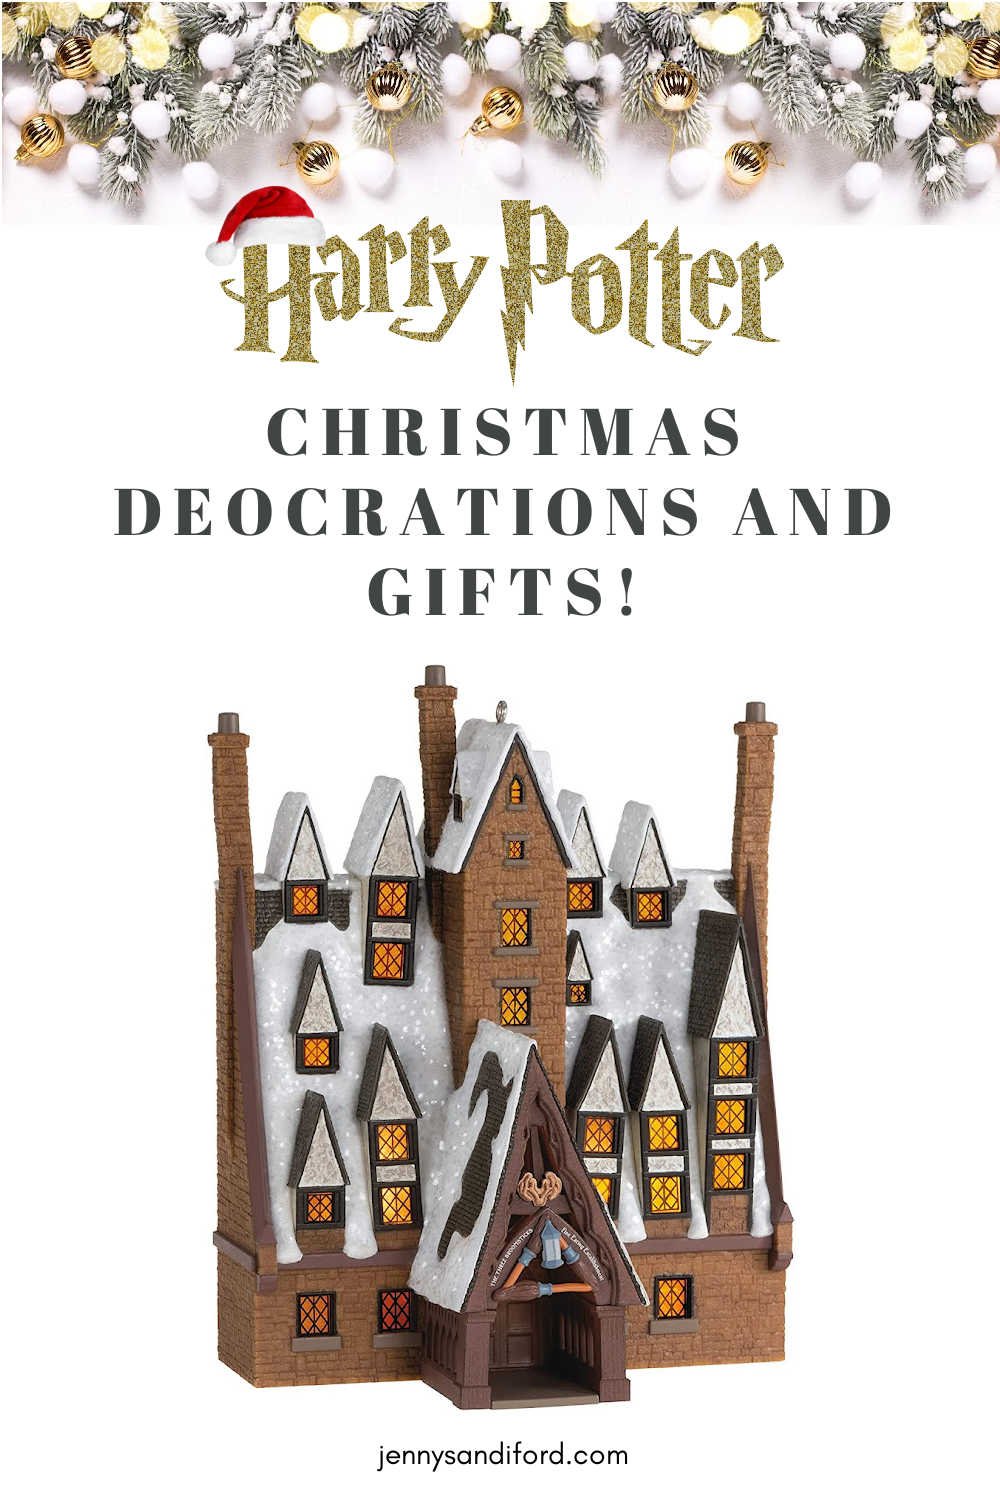 A Closer Look at the Viral Harry Potter Christmas Tree – Popcorner